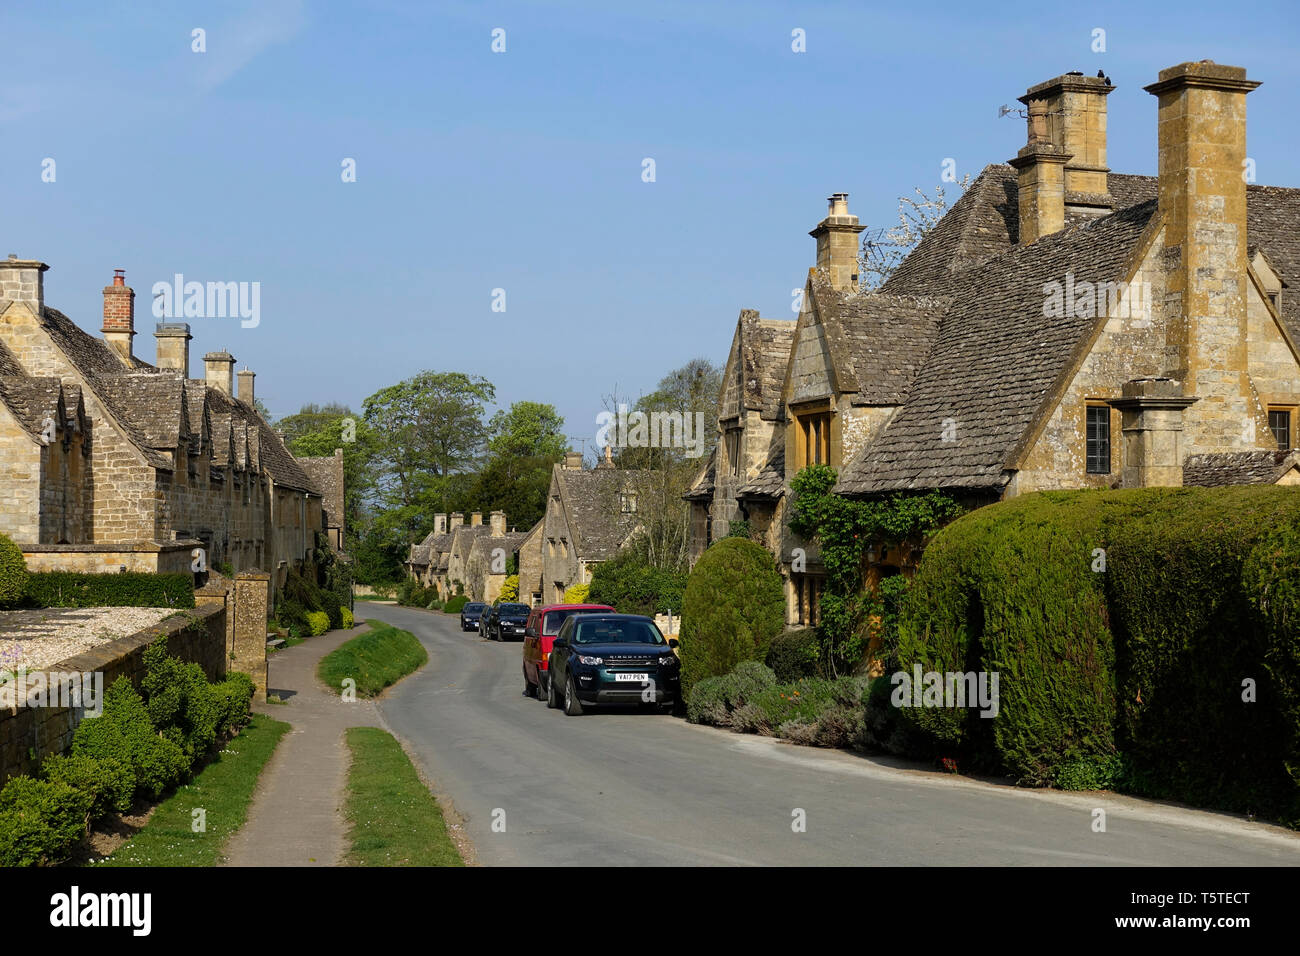 The village of Stanton in Gloucestershire, the Cotswolds England Stock Photo